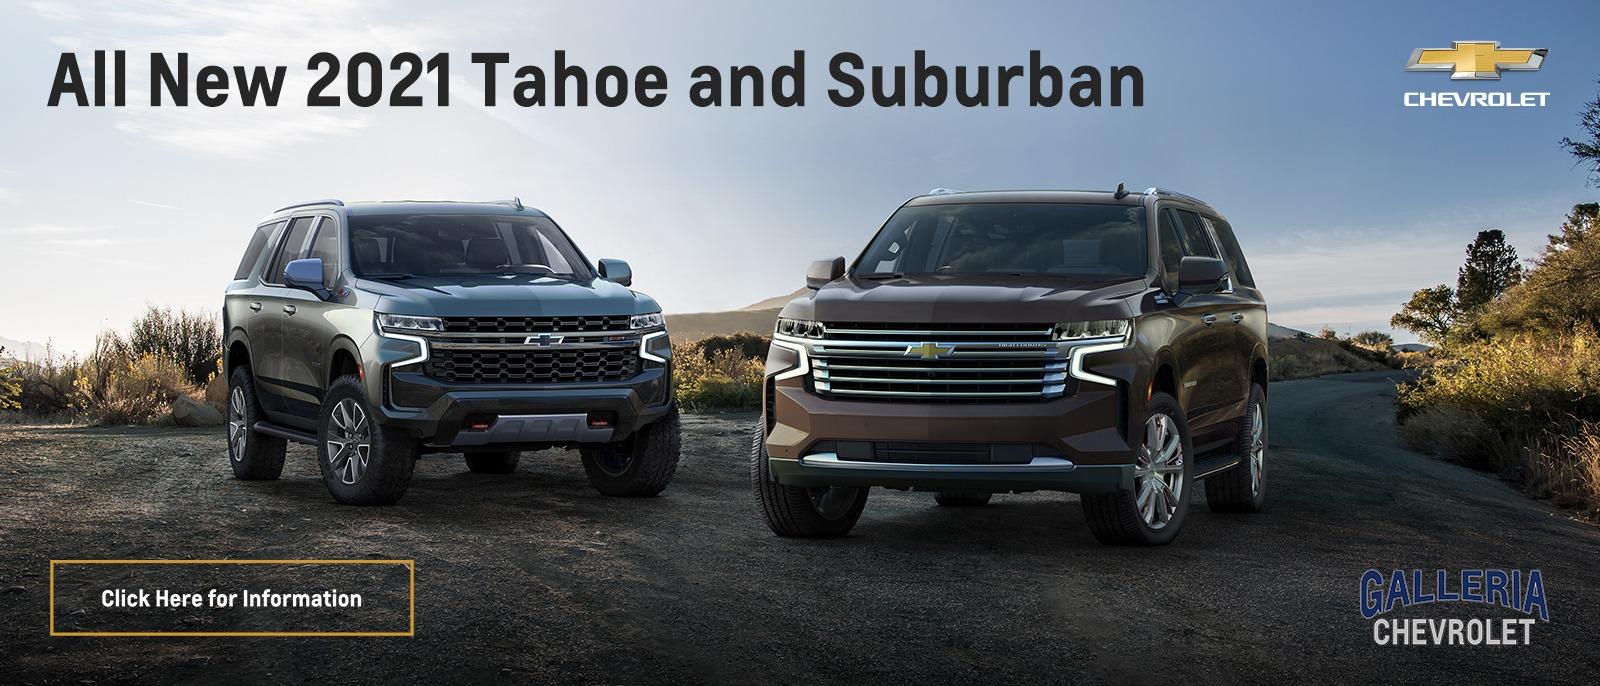 All New 2021 Tahoe and Suburban Information